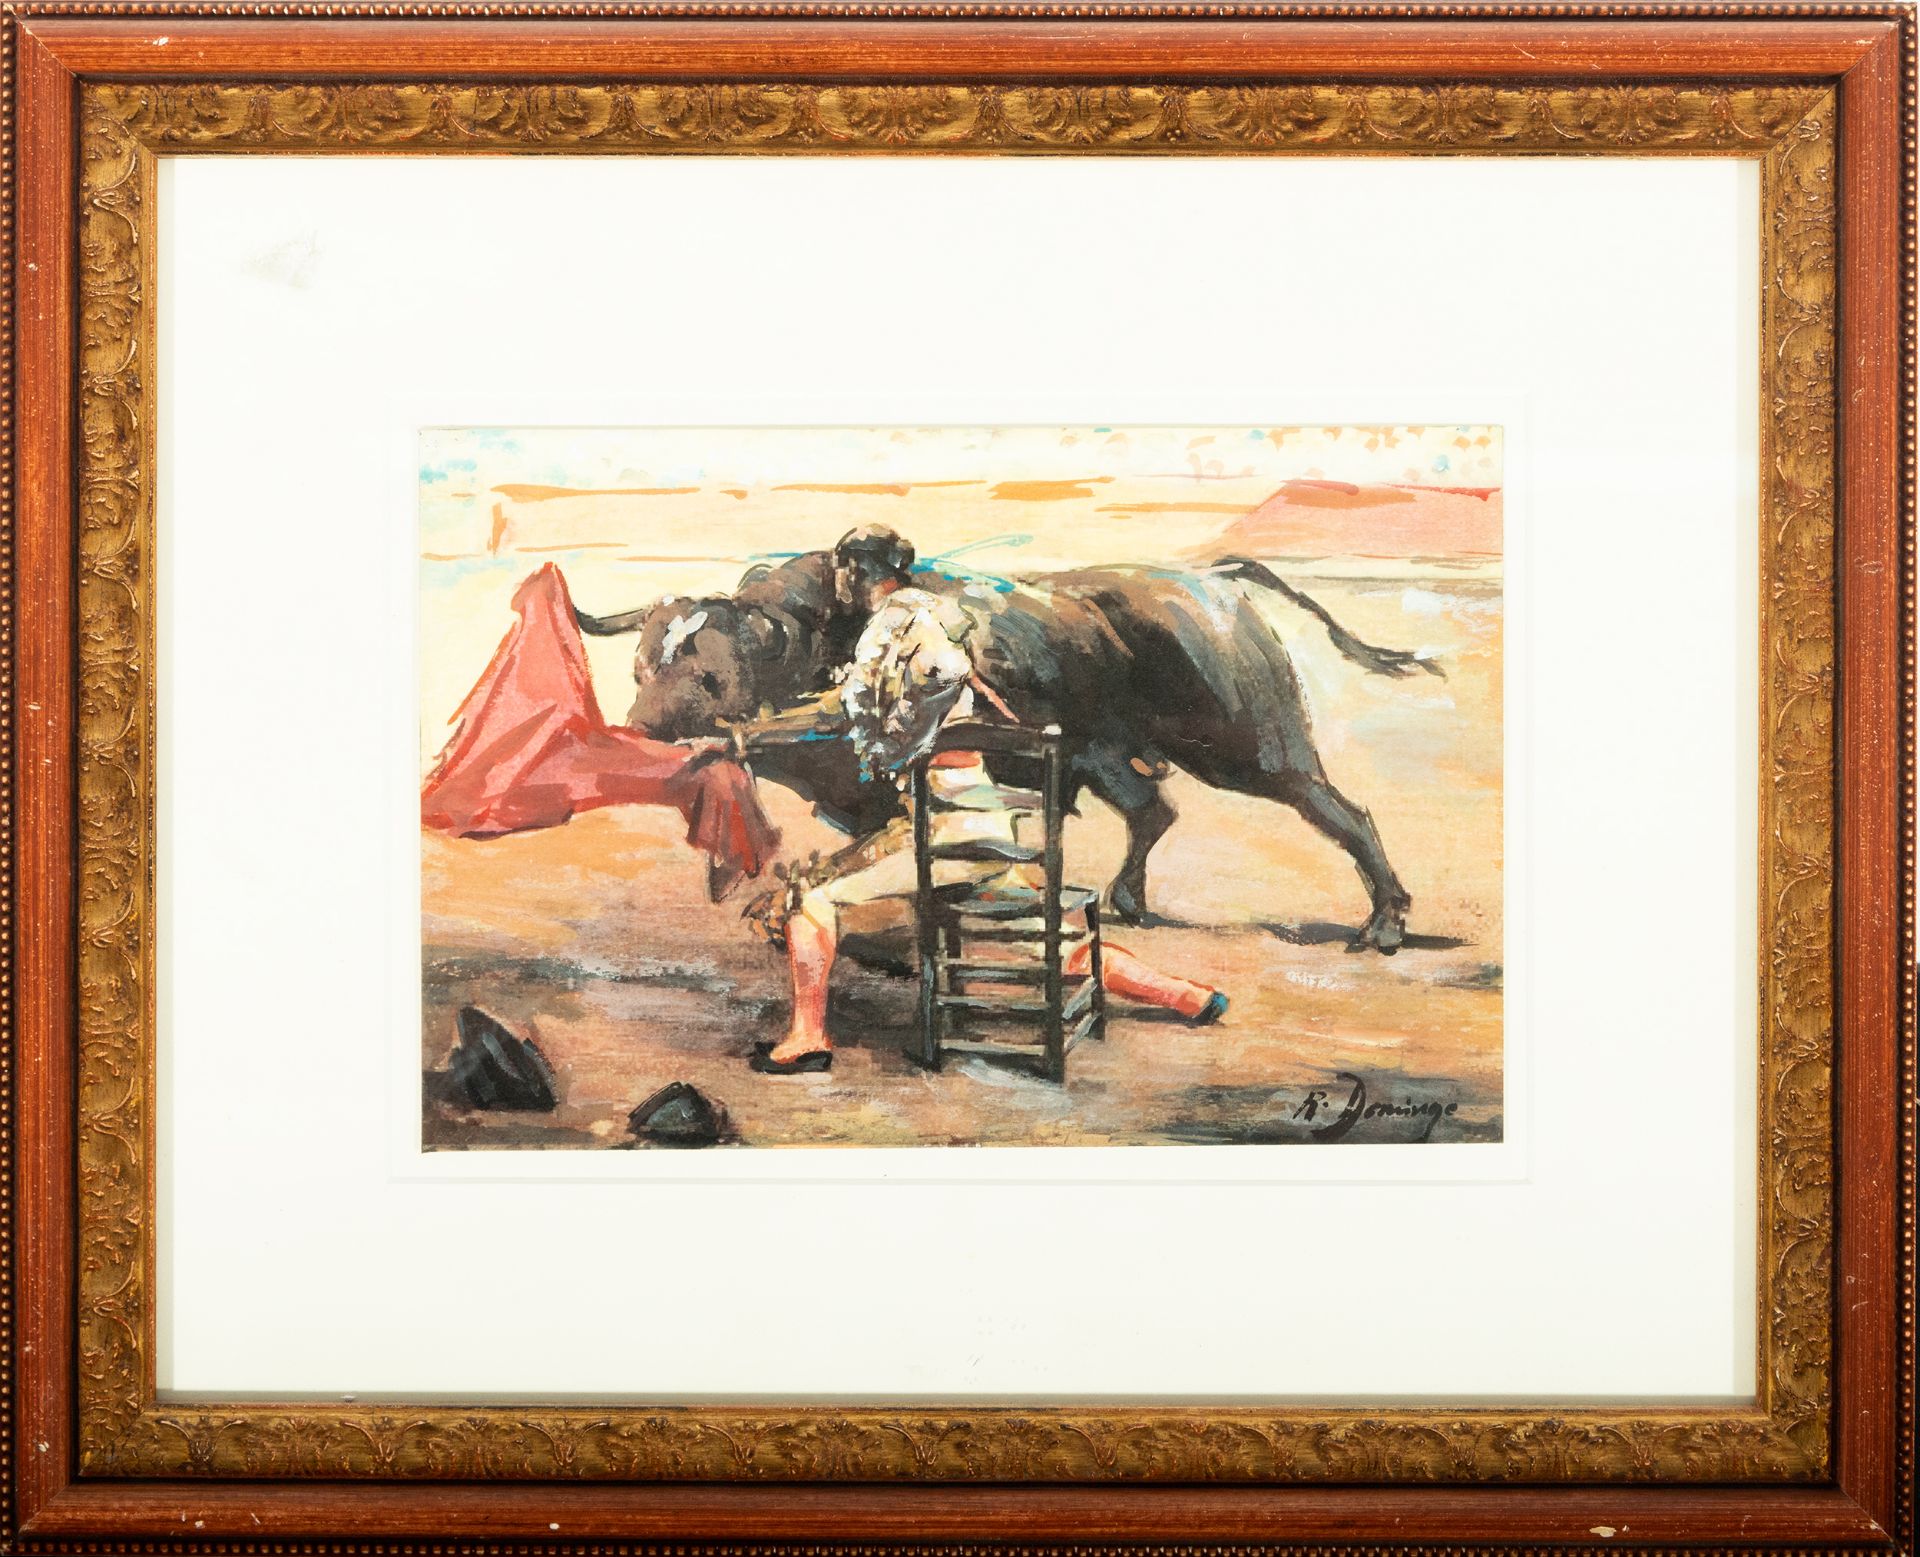 Bullfighter, watercolor on paper, signed R. Domingo